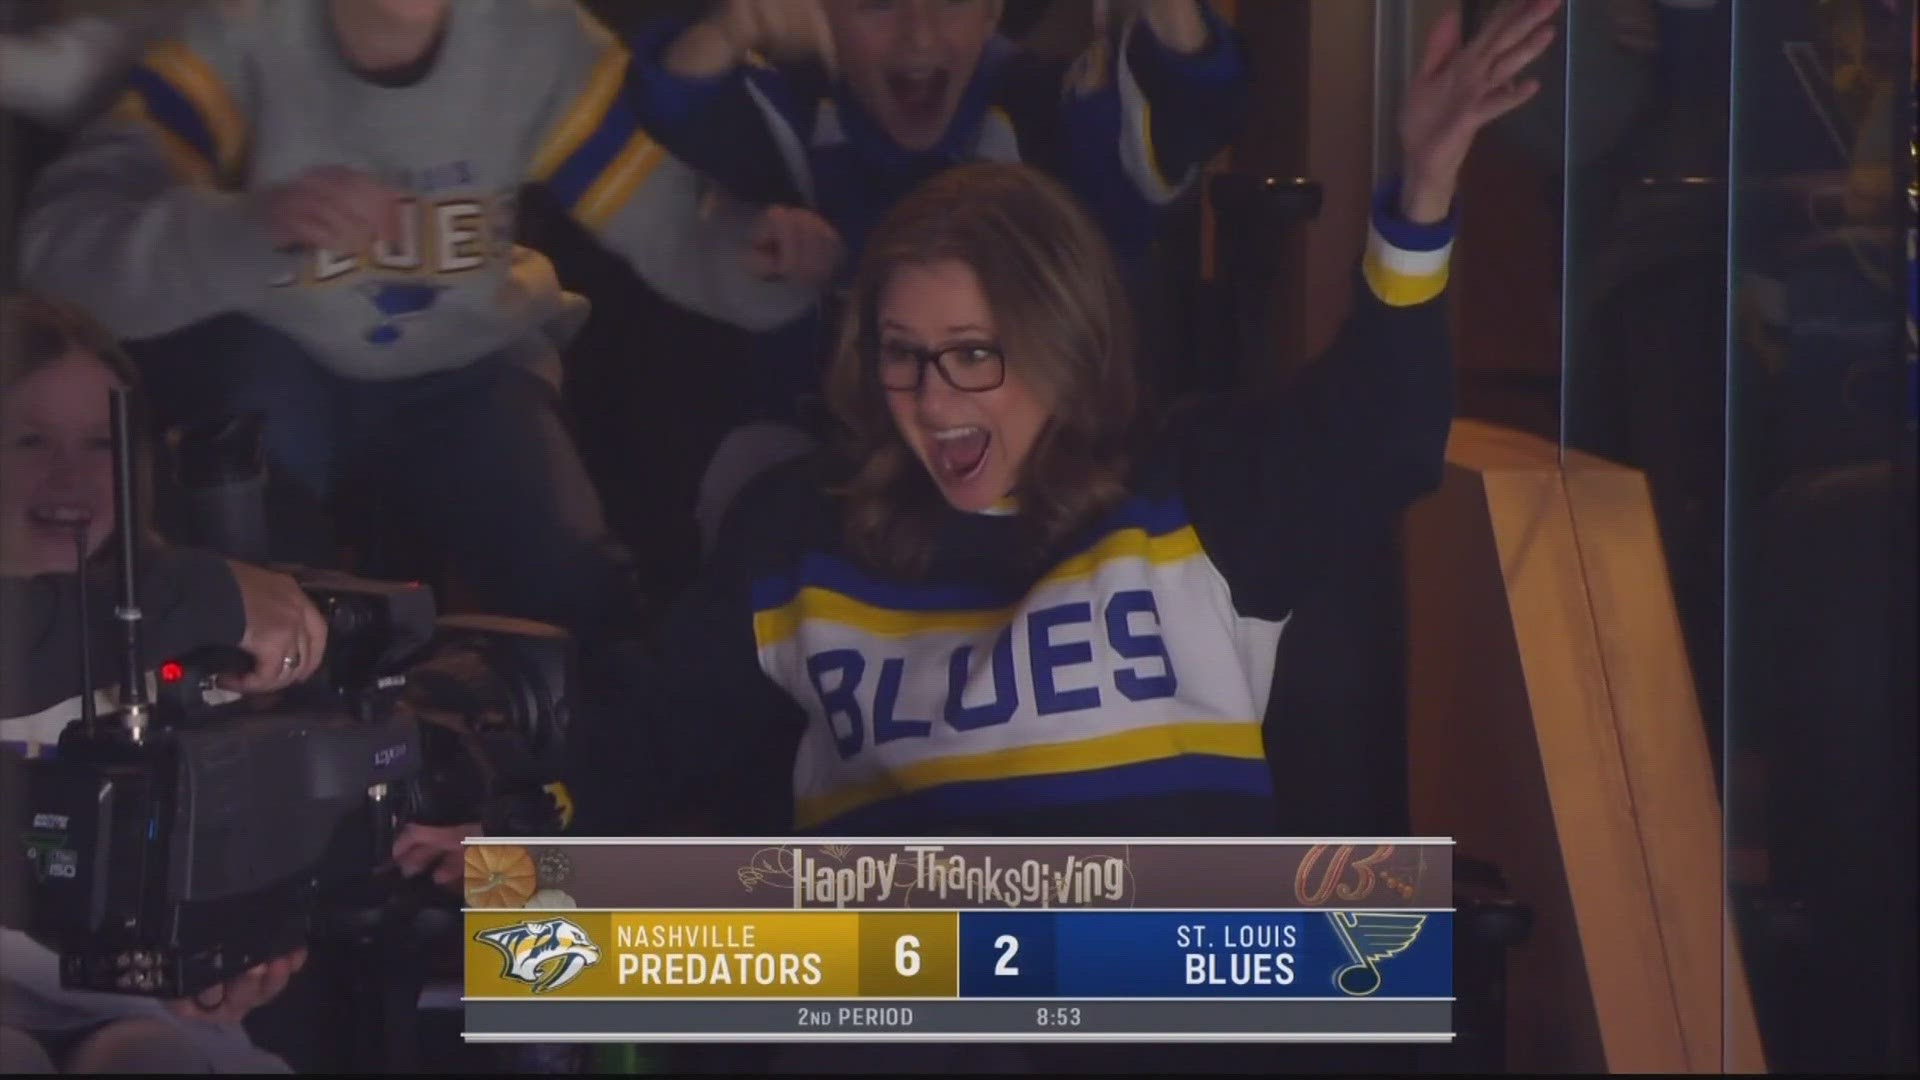 Fans going to Friday afternoon's St. Louis Blues game got an extra surprise from a famous St. Louis native.